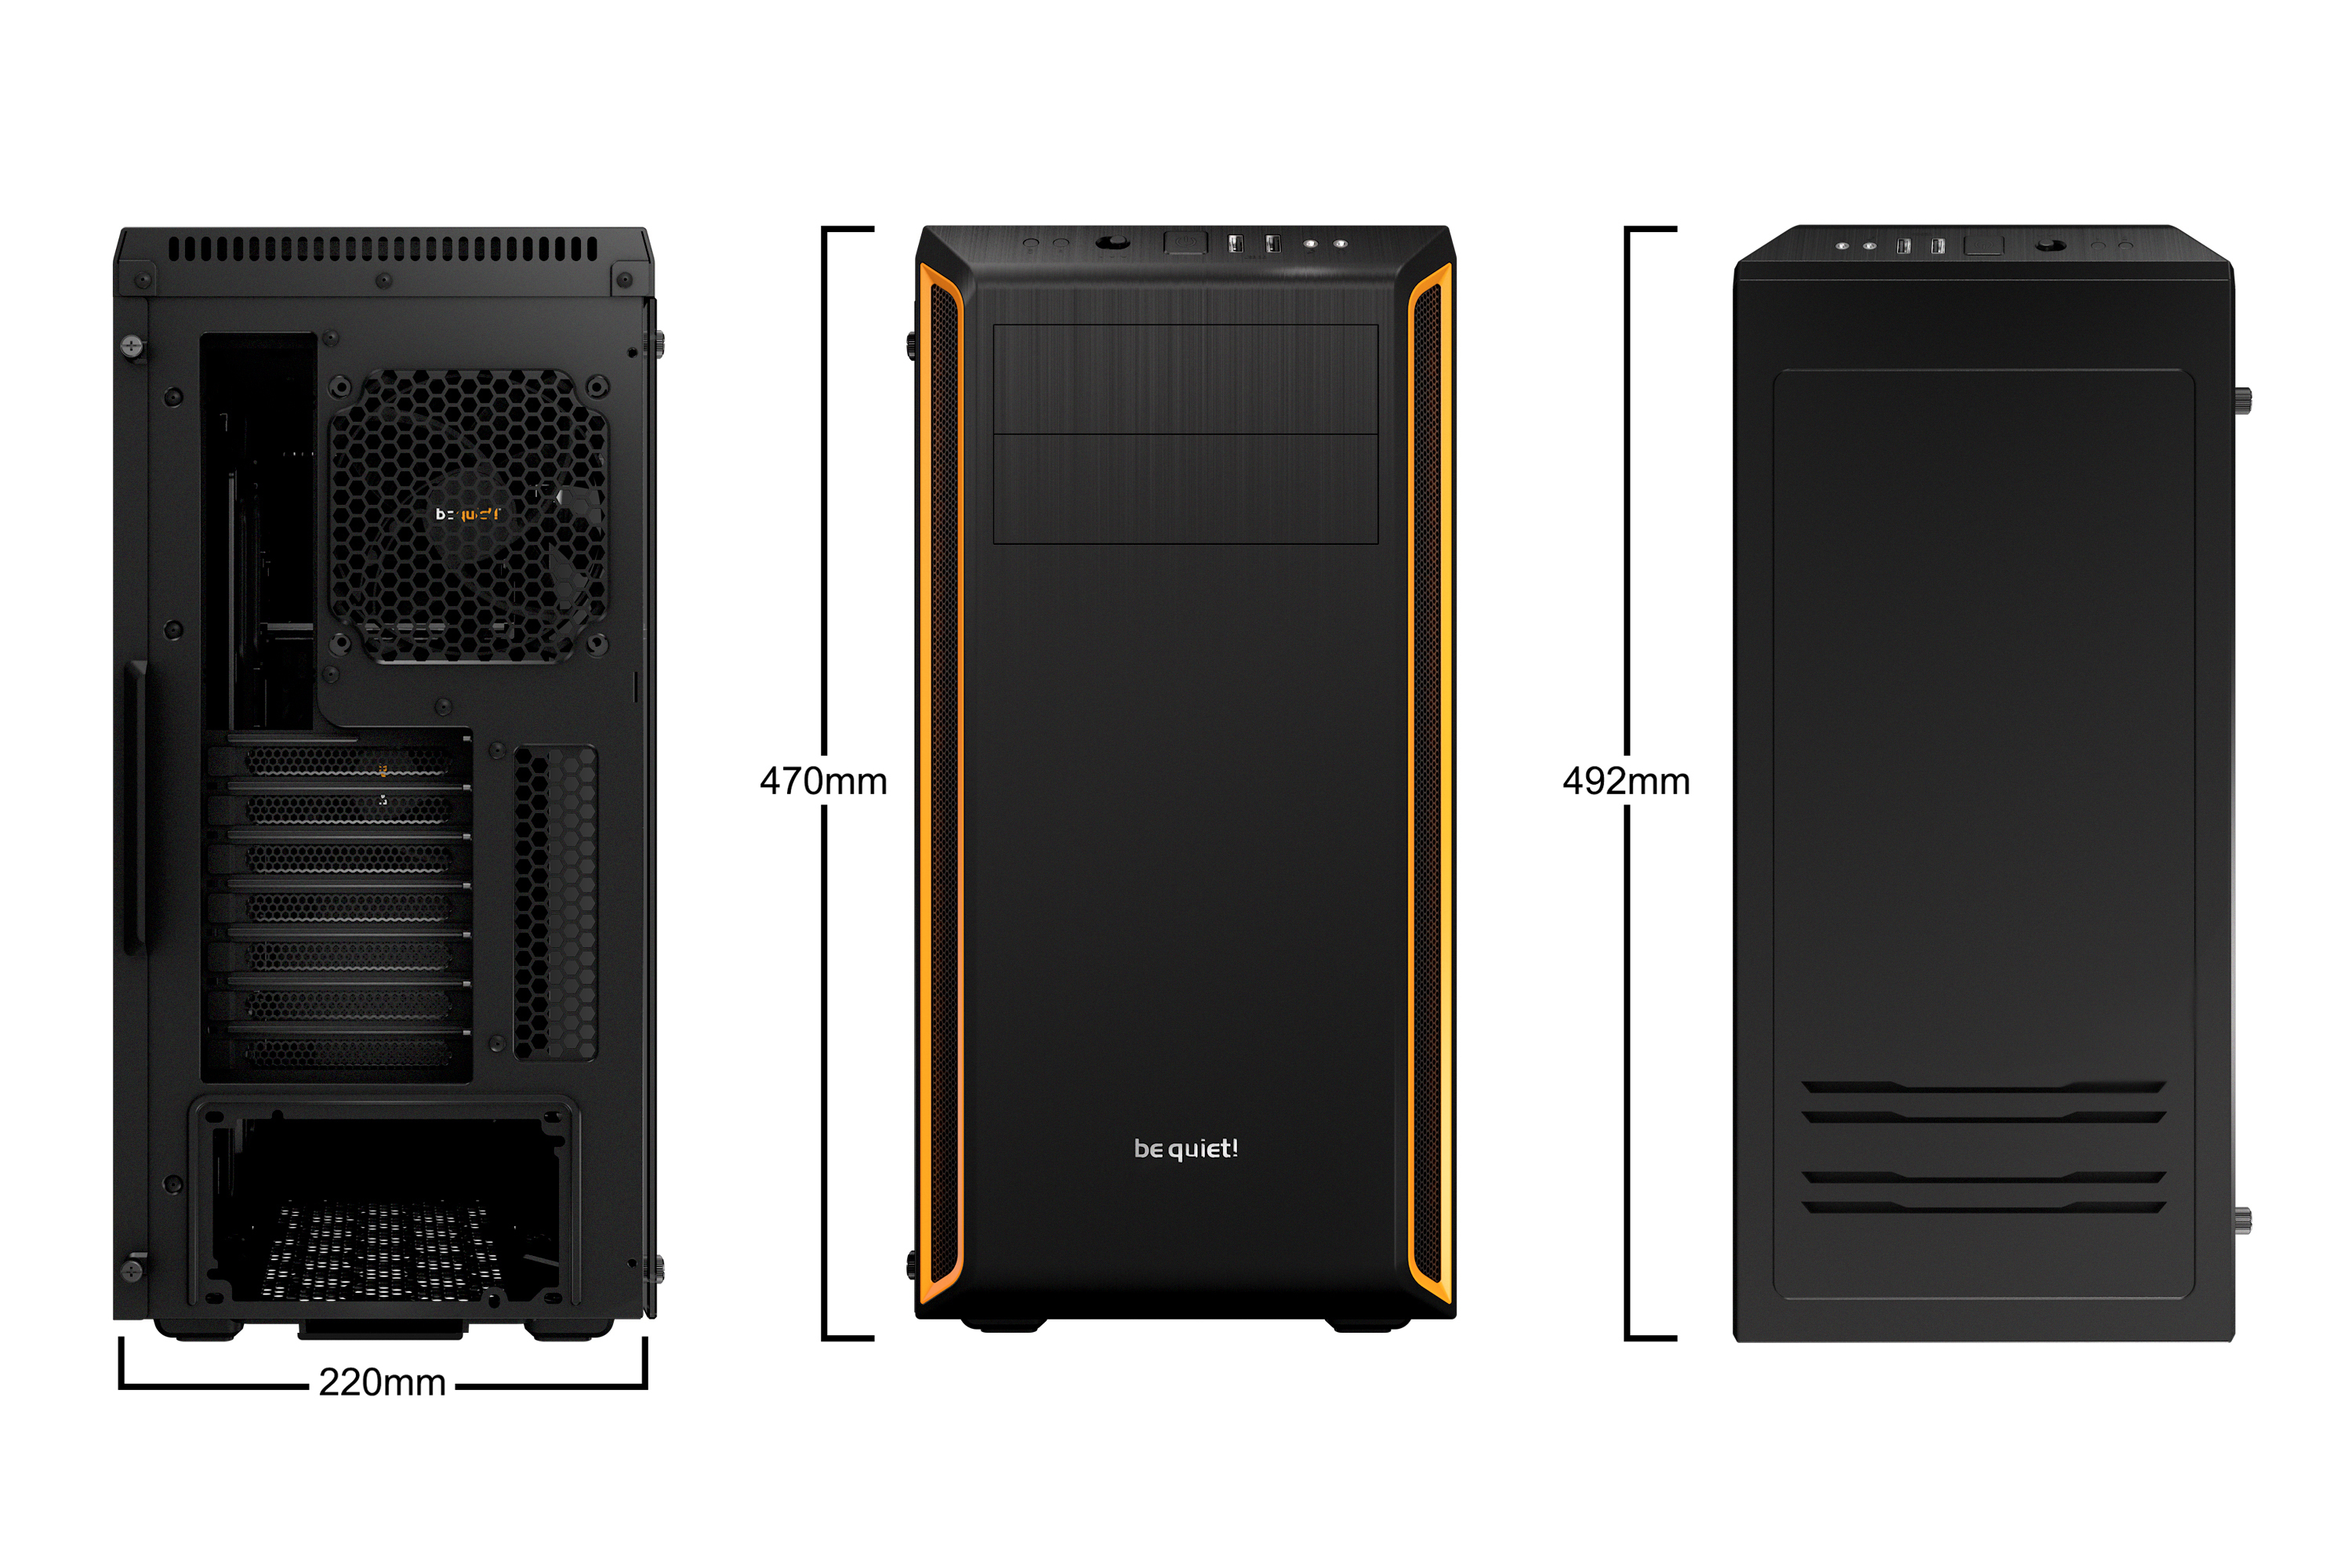 be quiet! Pure Base 600 Window Orange, 492 x 220 x 470, IO-panel 2x USB 3.0, HD Audio, 2x 5,25, 3x 3,5, 2x 2,5, inc 1x 140 mm en 1x 120 mm Pure Wings 2, dual air channel cooling, 3 step fan controller 3x3 pin, Watercooling ready, Glass Windows Side Panel